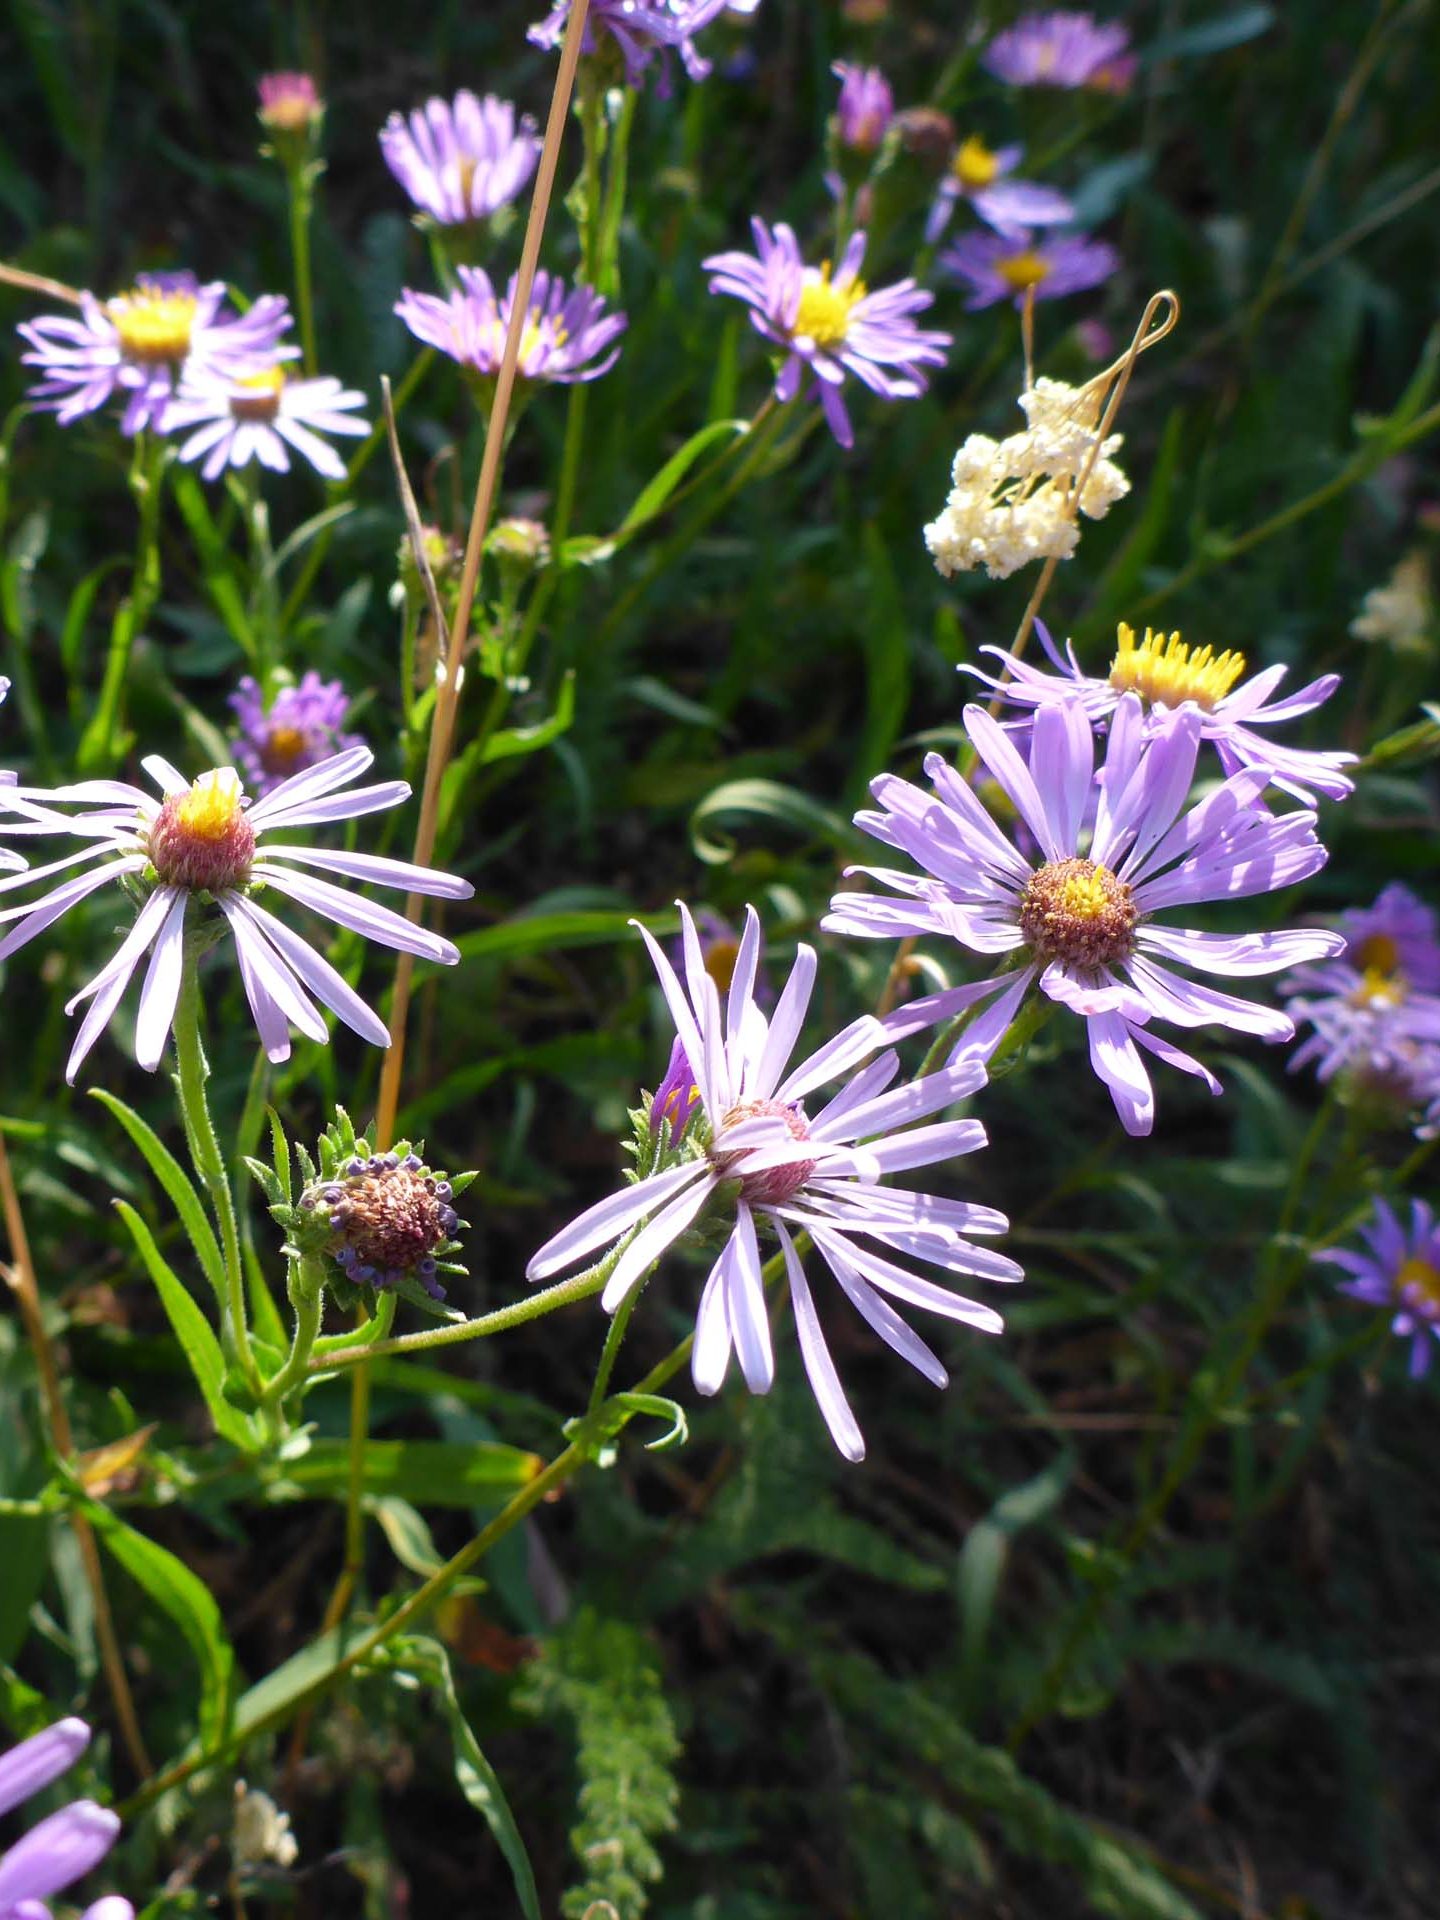 Western mountain asters. D. Burk.